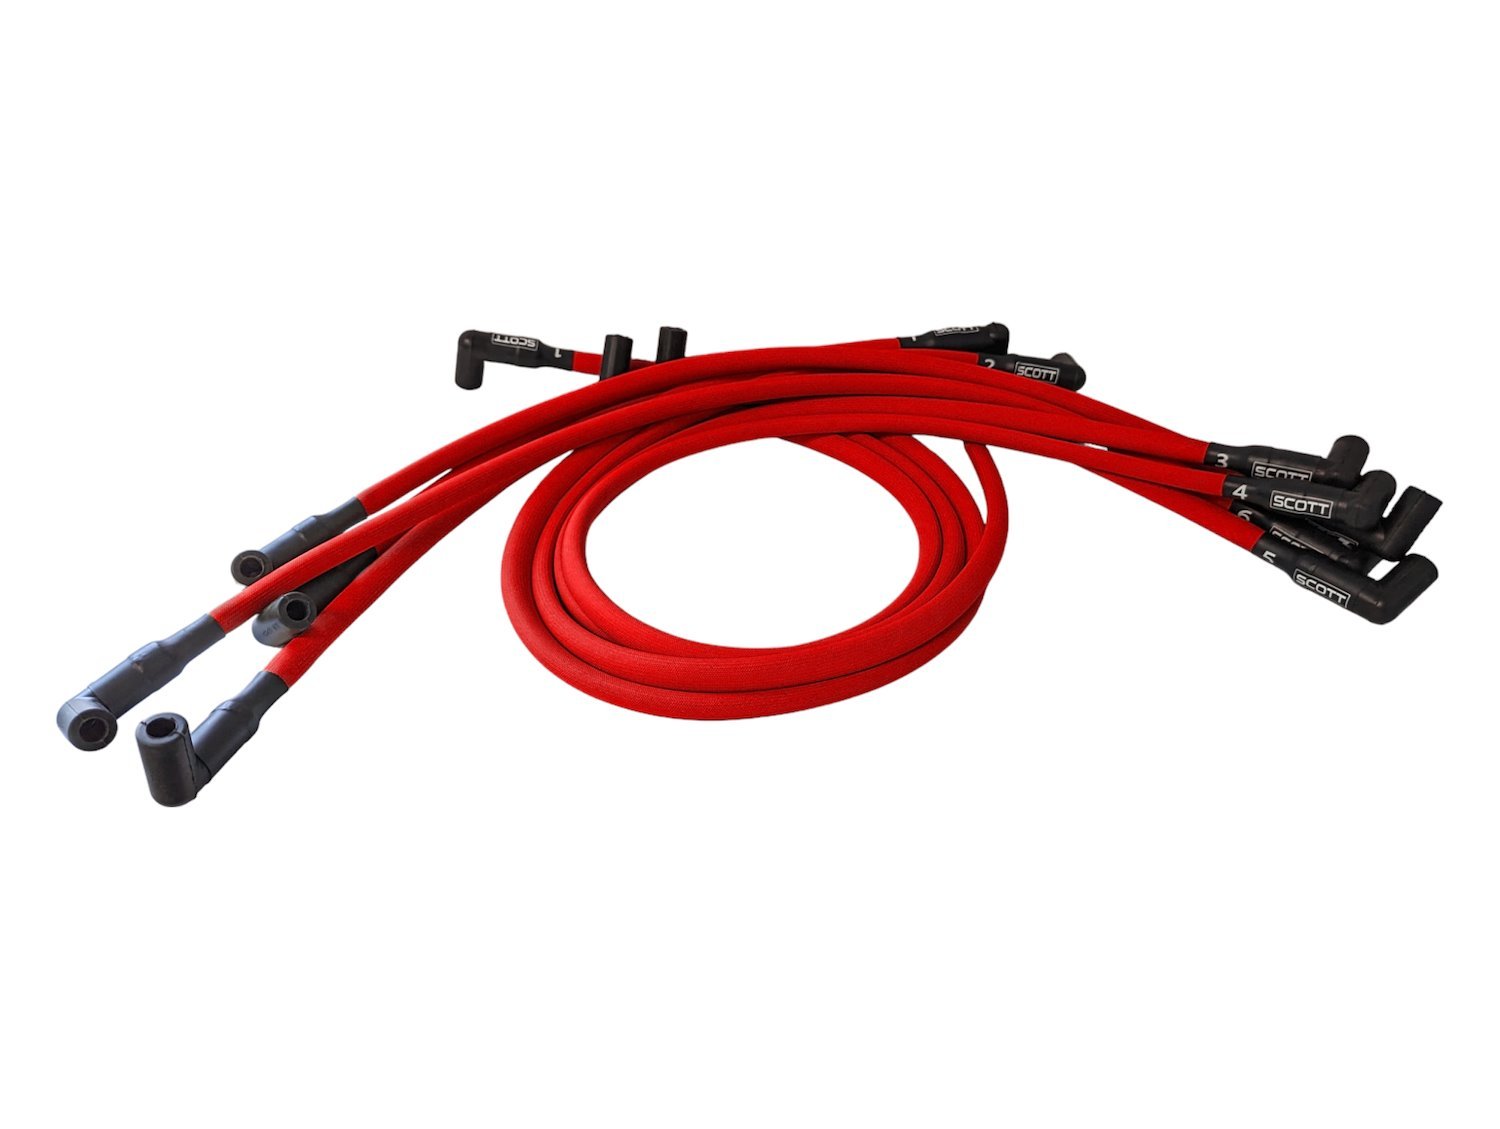 SPW-PS-516-2 High-Performance Fiberglass-Oversleeved Spark Plug Wire Set for Big Block Chevy Dragster, Under Header [Red]